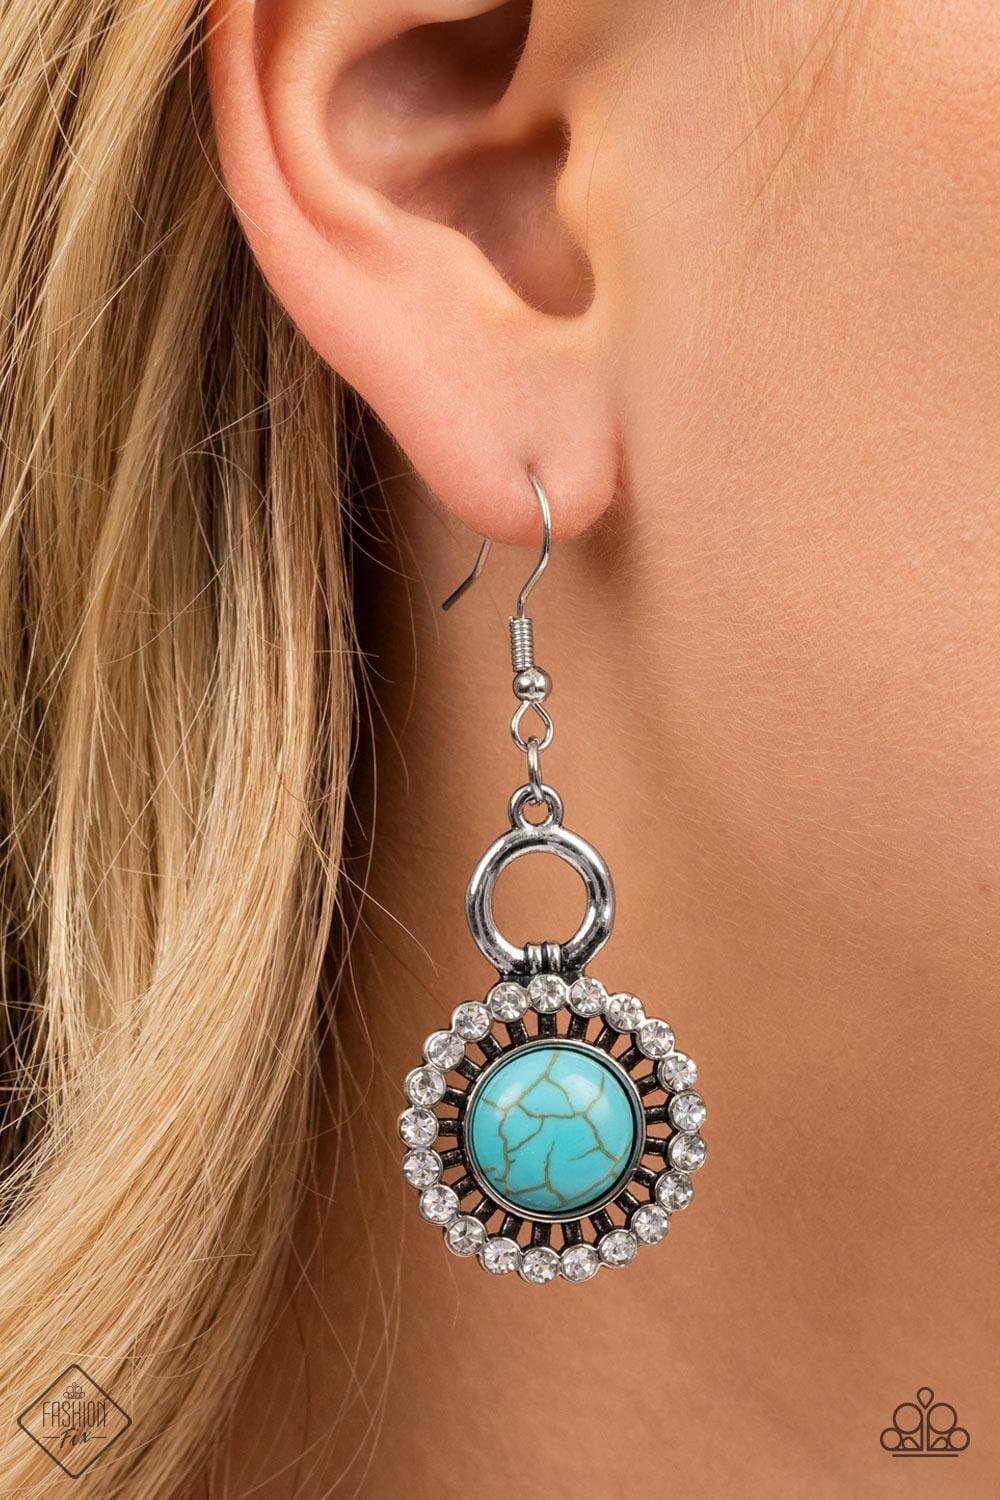 Paparazzi Accessories - Mojave Mogul - Blue / Turquoise Earrings - Bling by JessieK